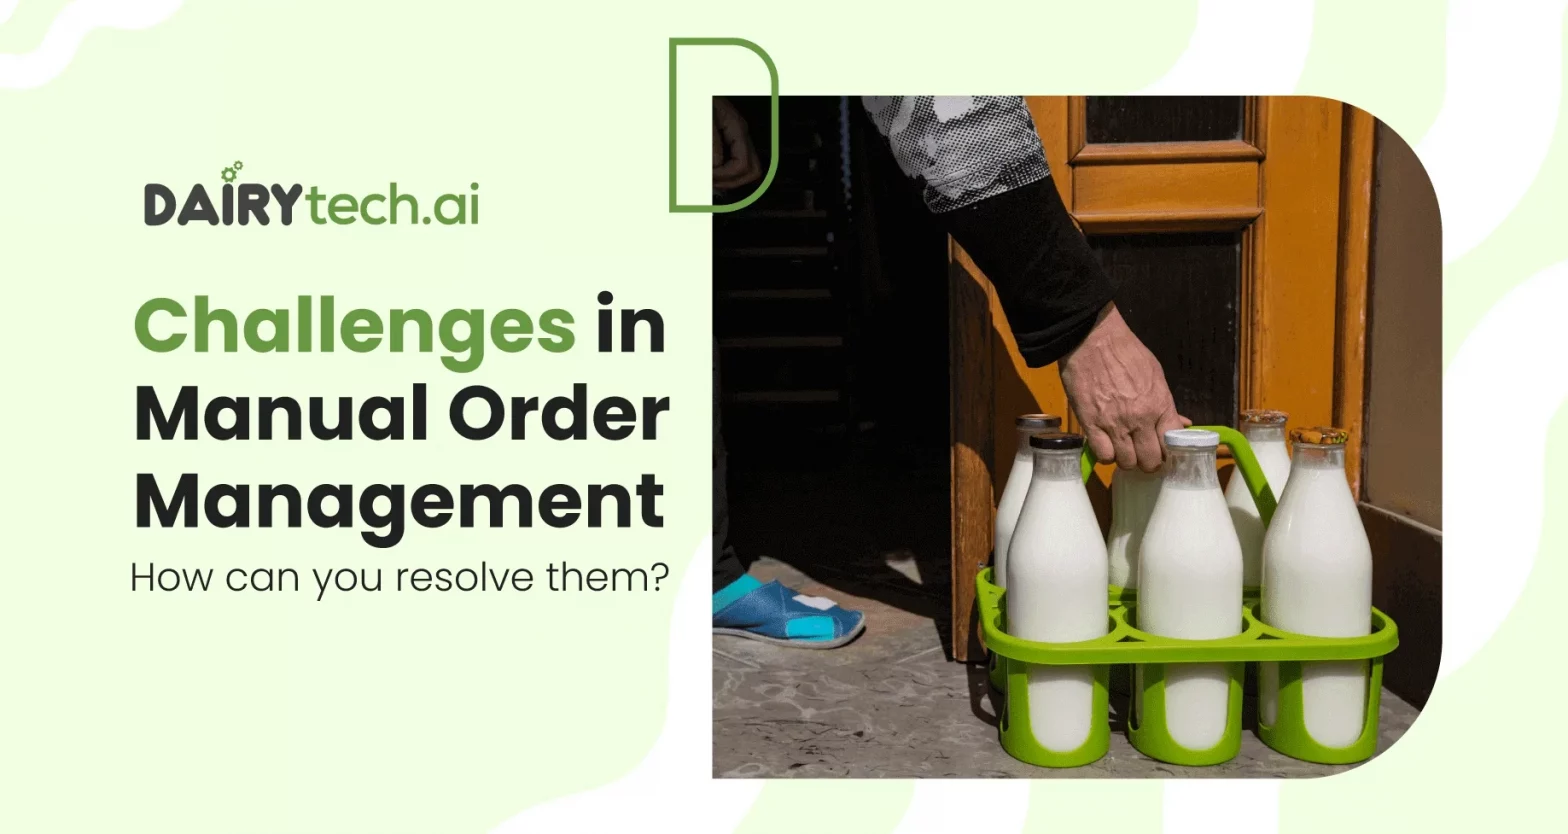 dairytechai-founded-by-ravi-garg-website-insights-what-are-the-challenges-in-manual-order-management (1)